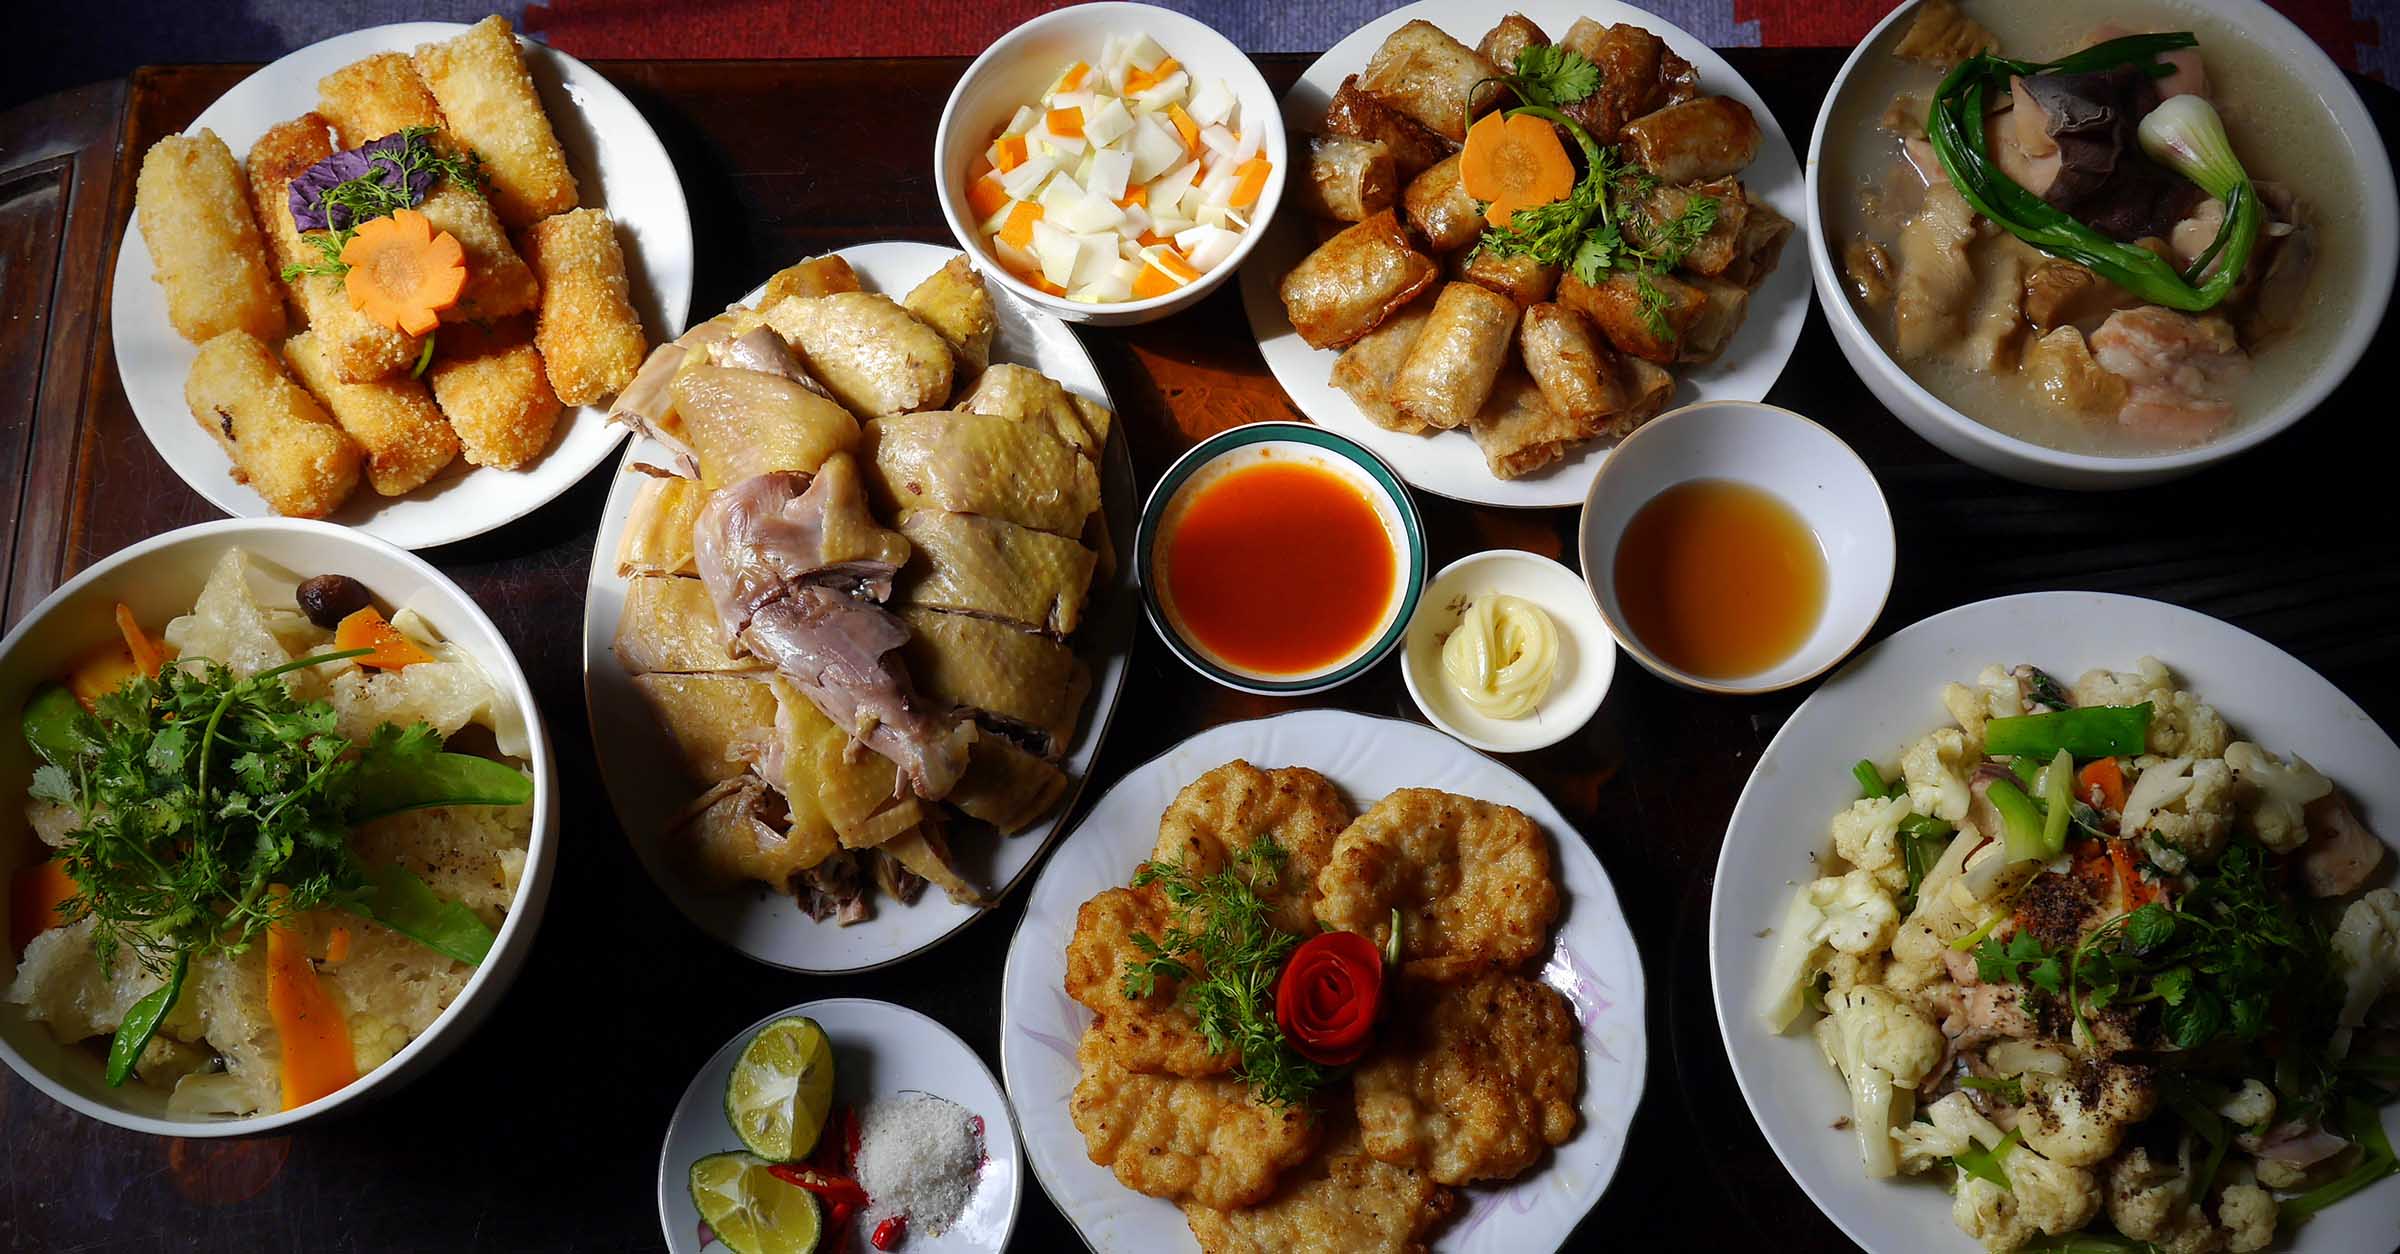 Where To Find The Best Vietnamese Food In Ho Chi Minh City - Vietcetera